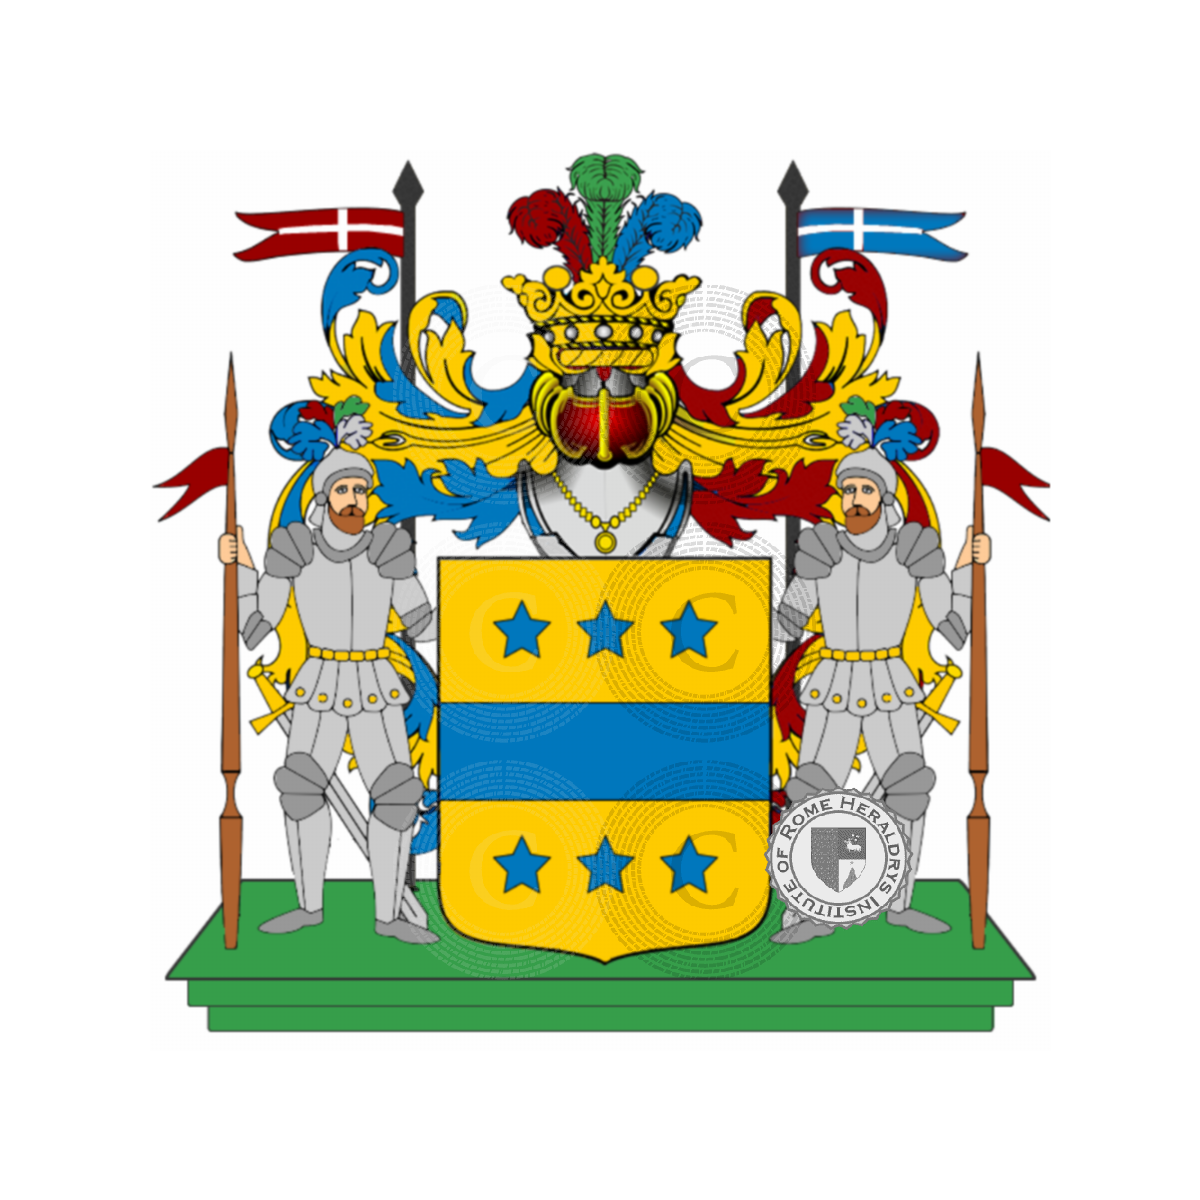 Coat of arms of familycassini